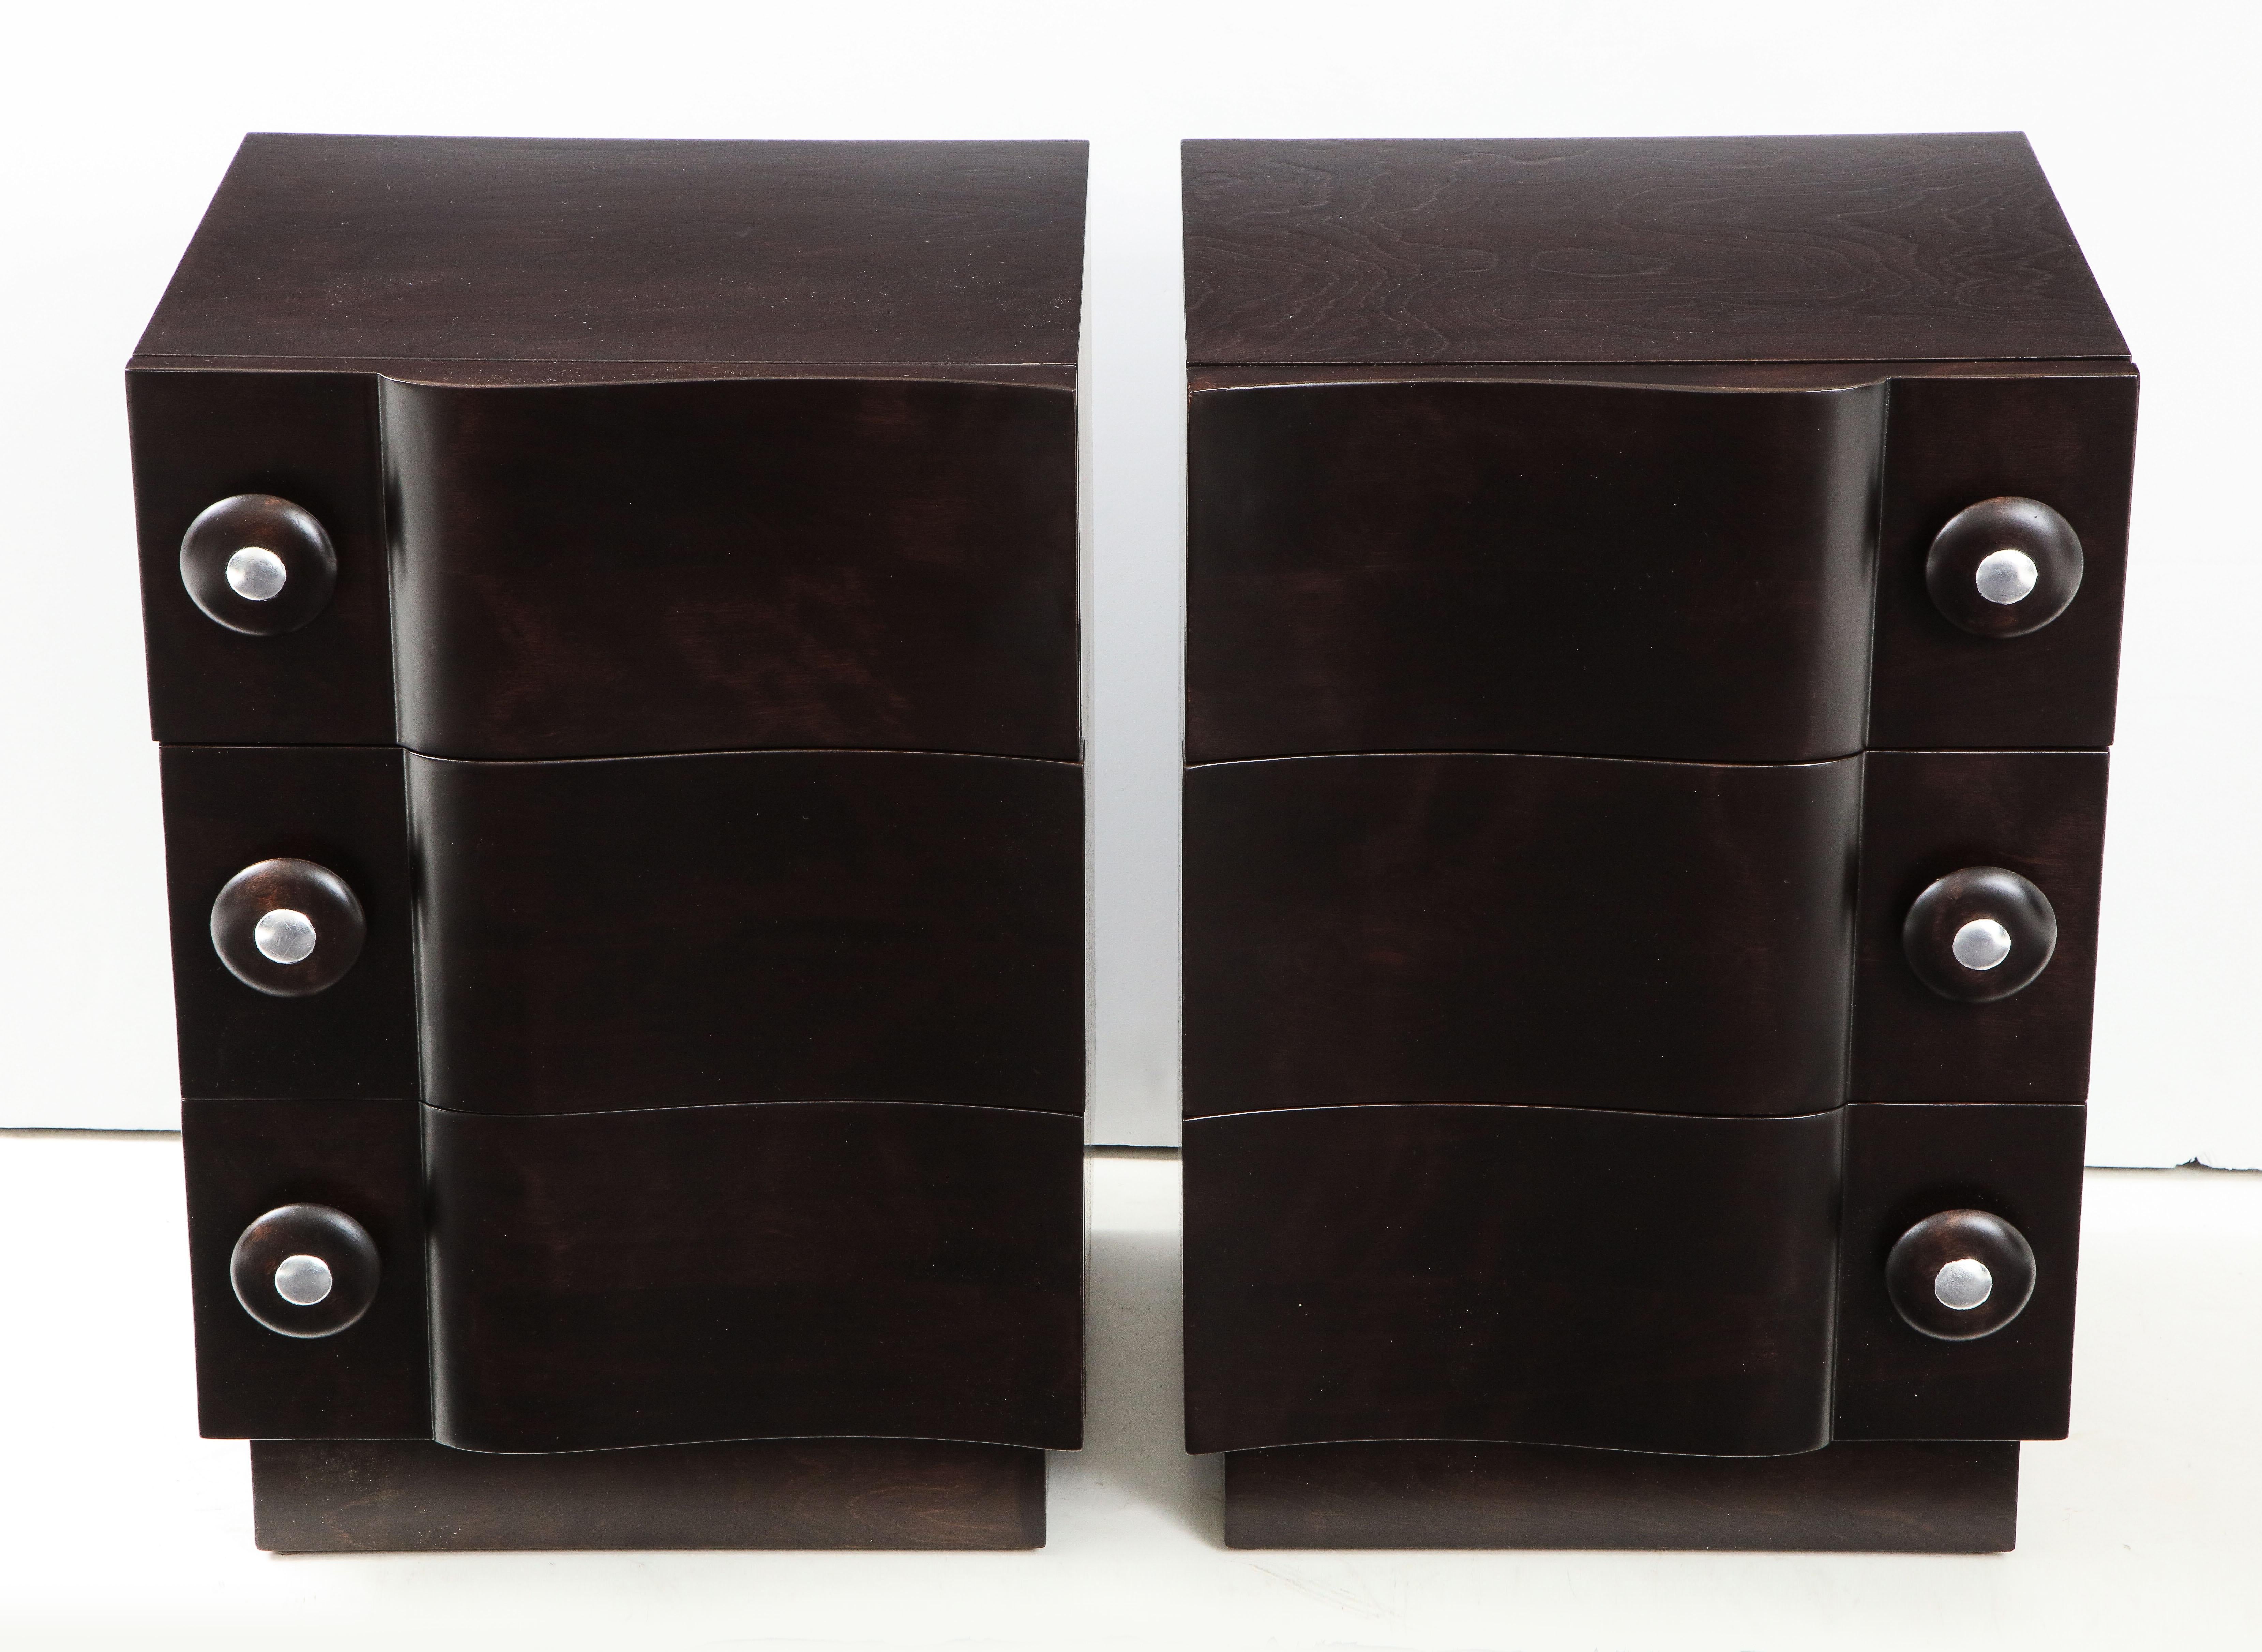 Wonderful pair of rare wave front cabinets / nightstands by James Mont.
The cabinets have been totally restored in a beautiful ebonized finish.